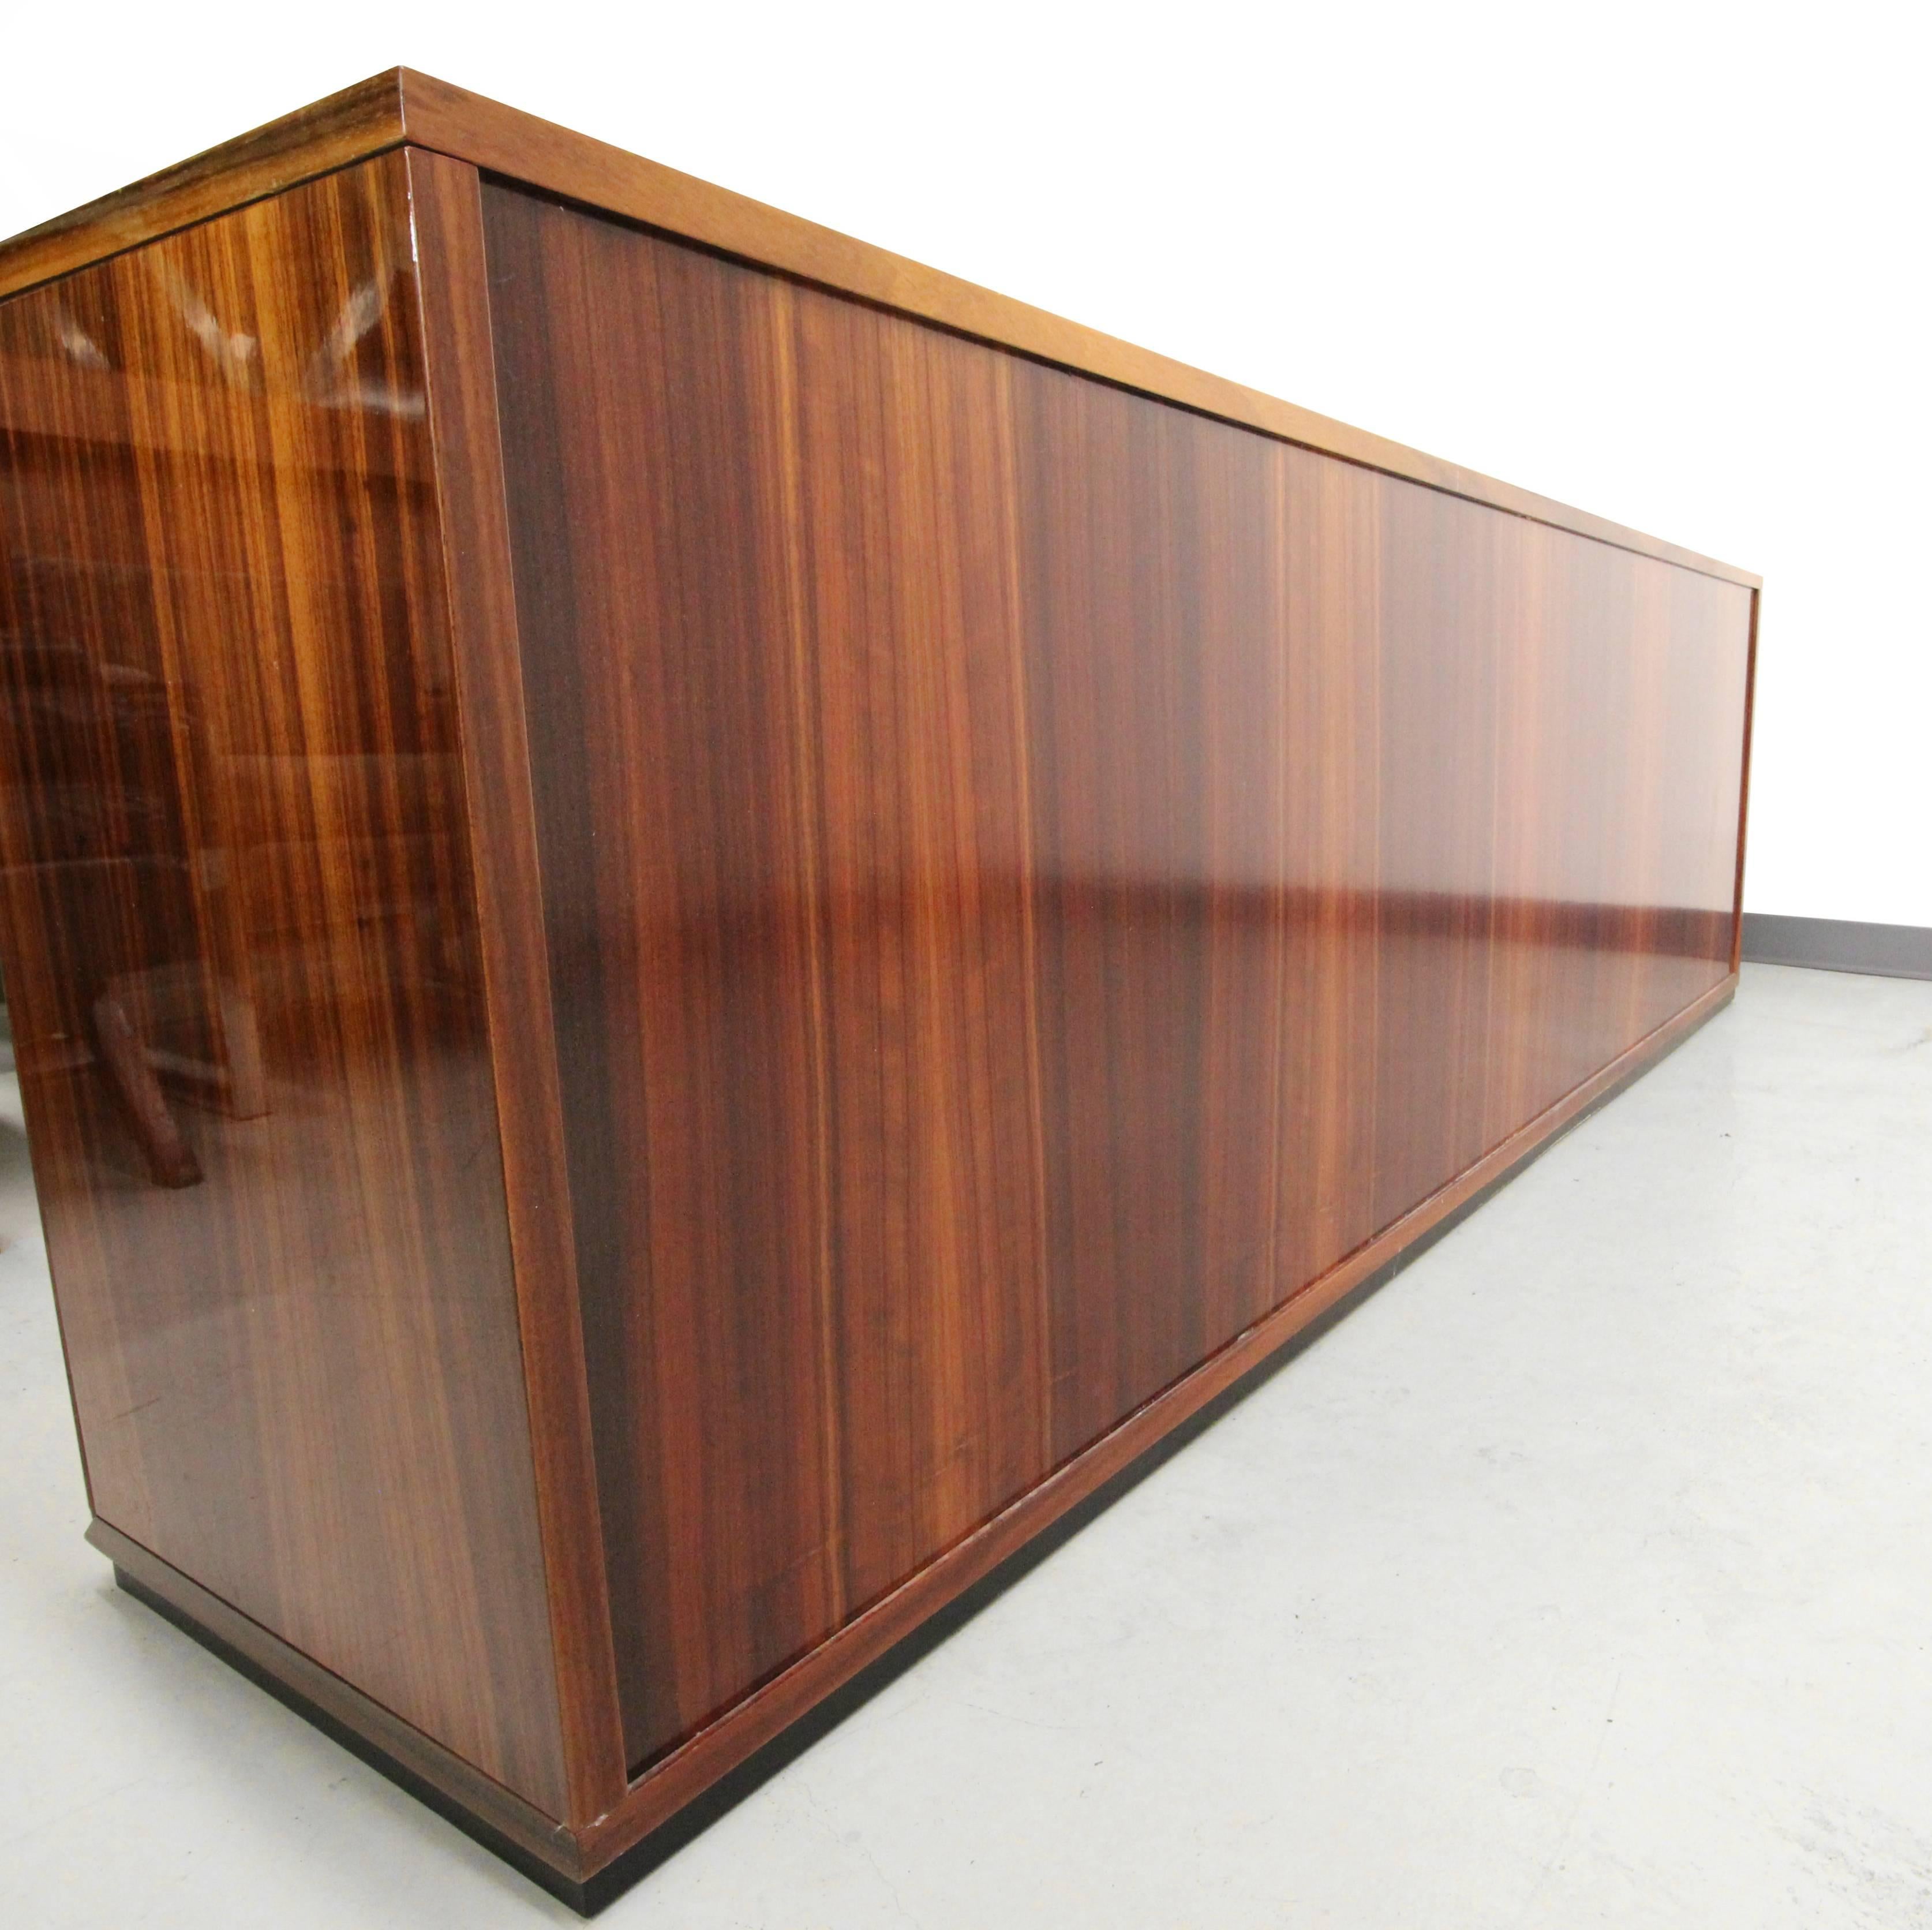 Monumental Italian Lacquered Zebrawood Credenza Buffet 1